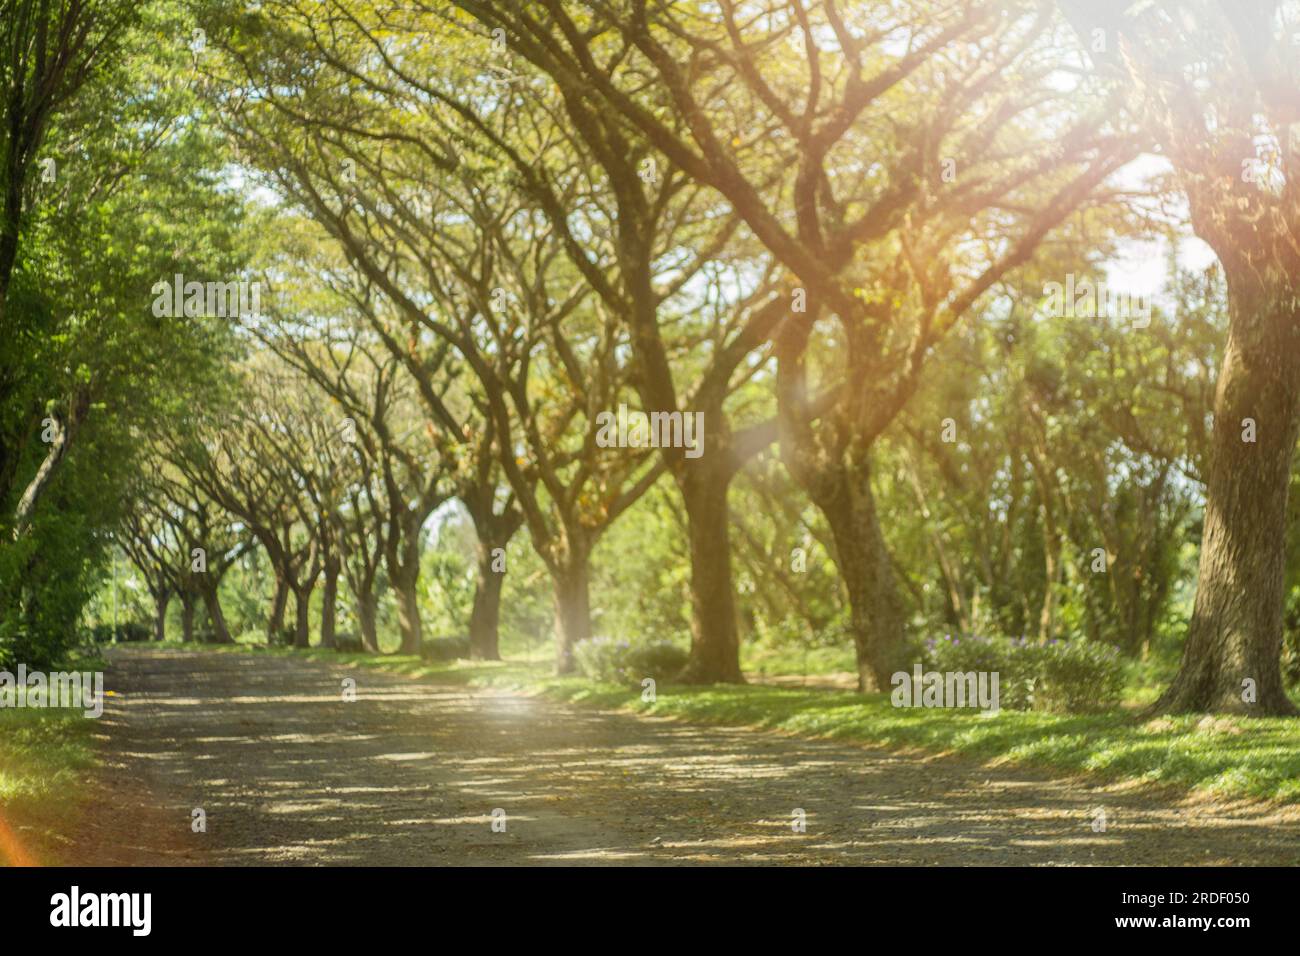 beautiful road with tree straight at sunrise. summer or fall, tj lesung road. Stock Photo